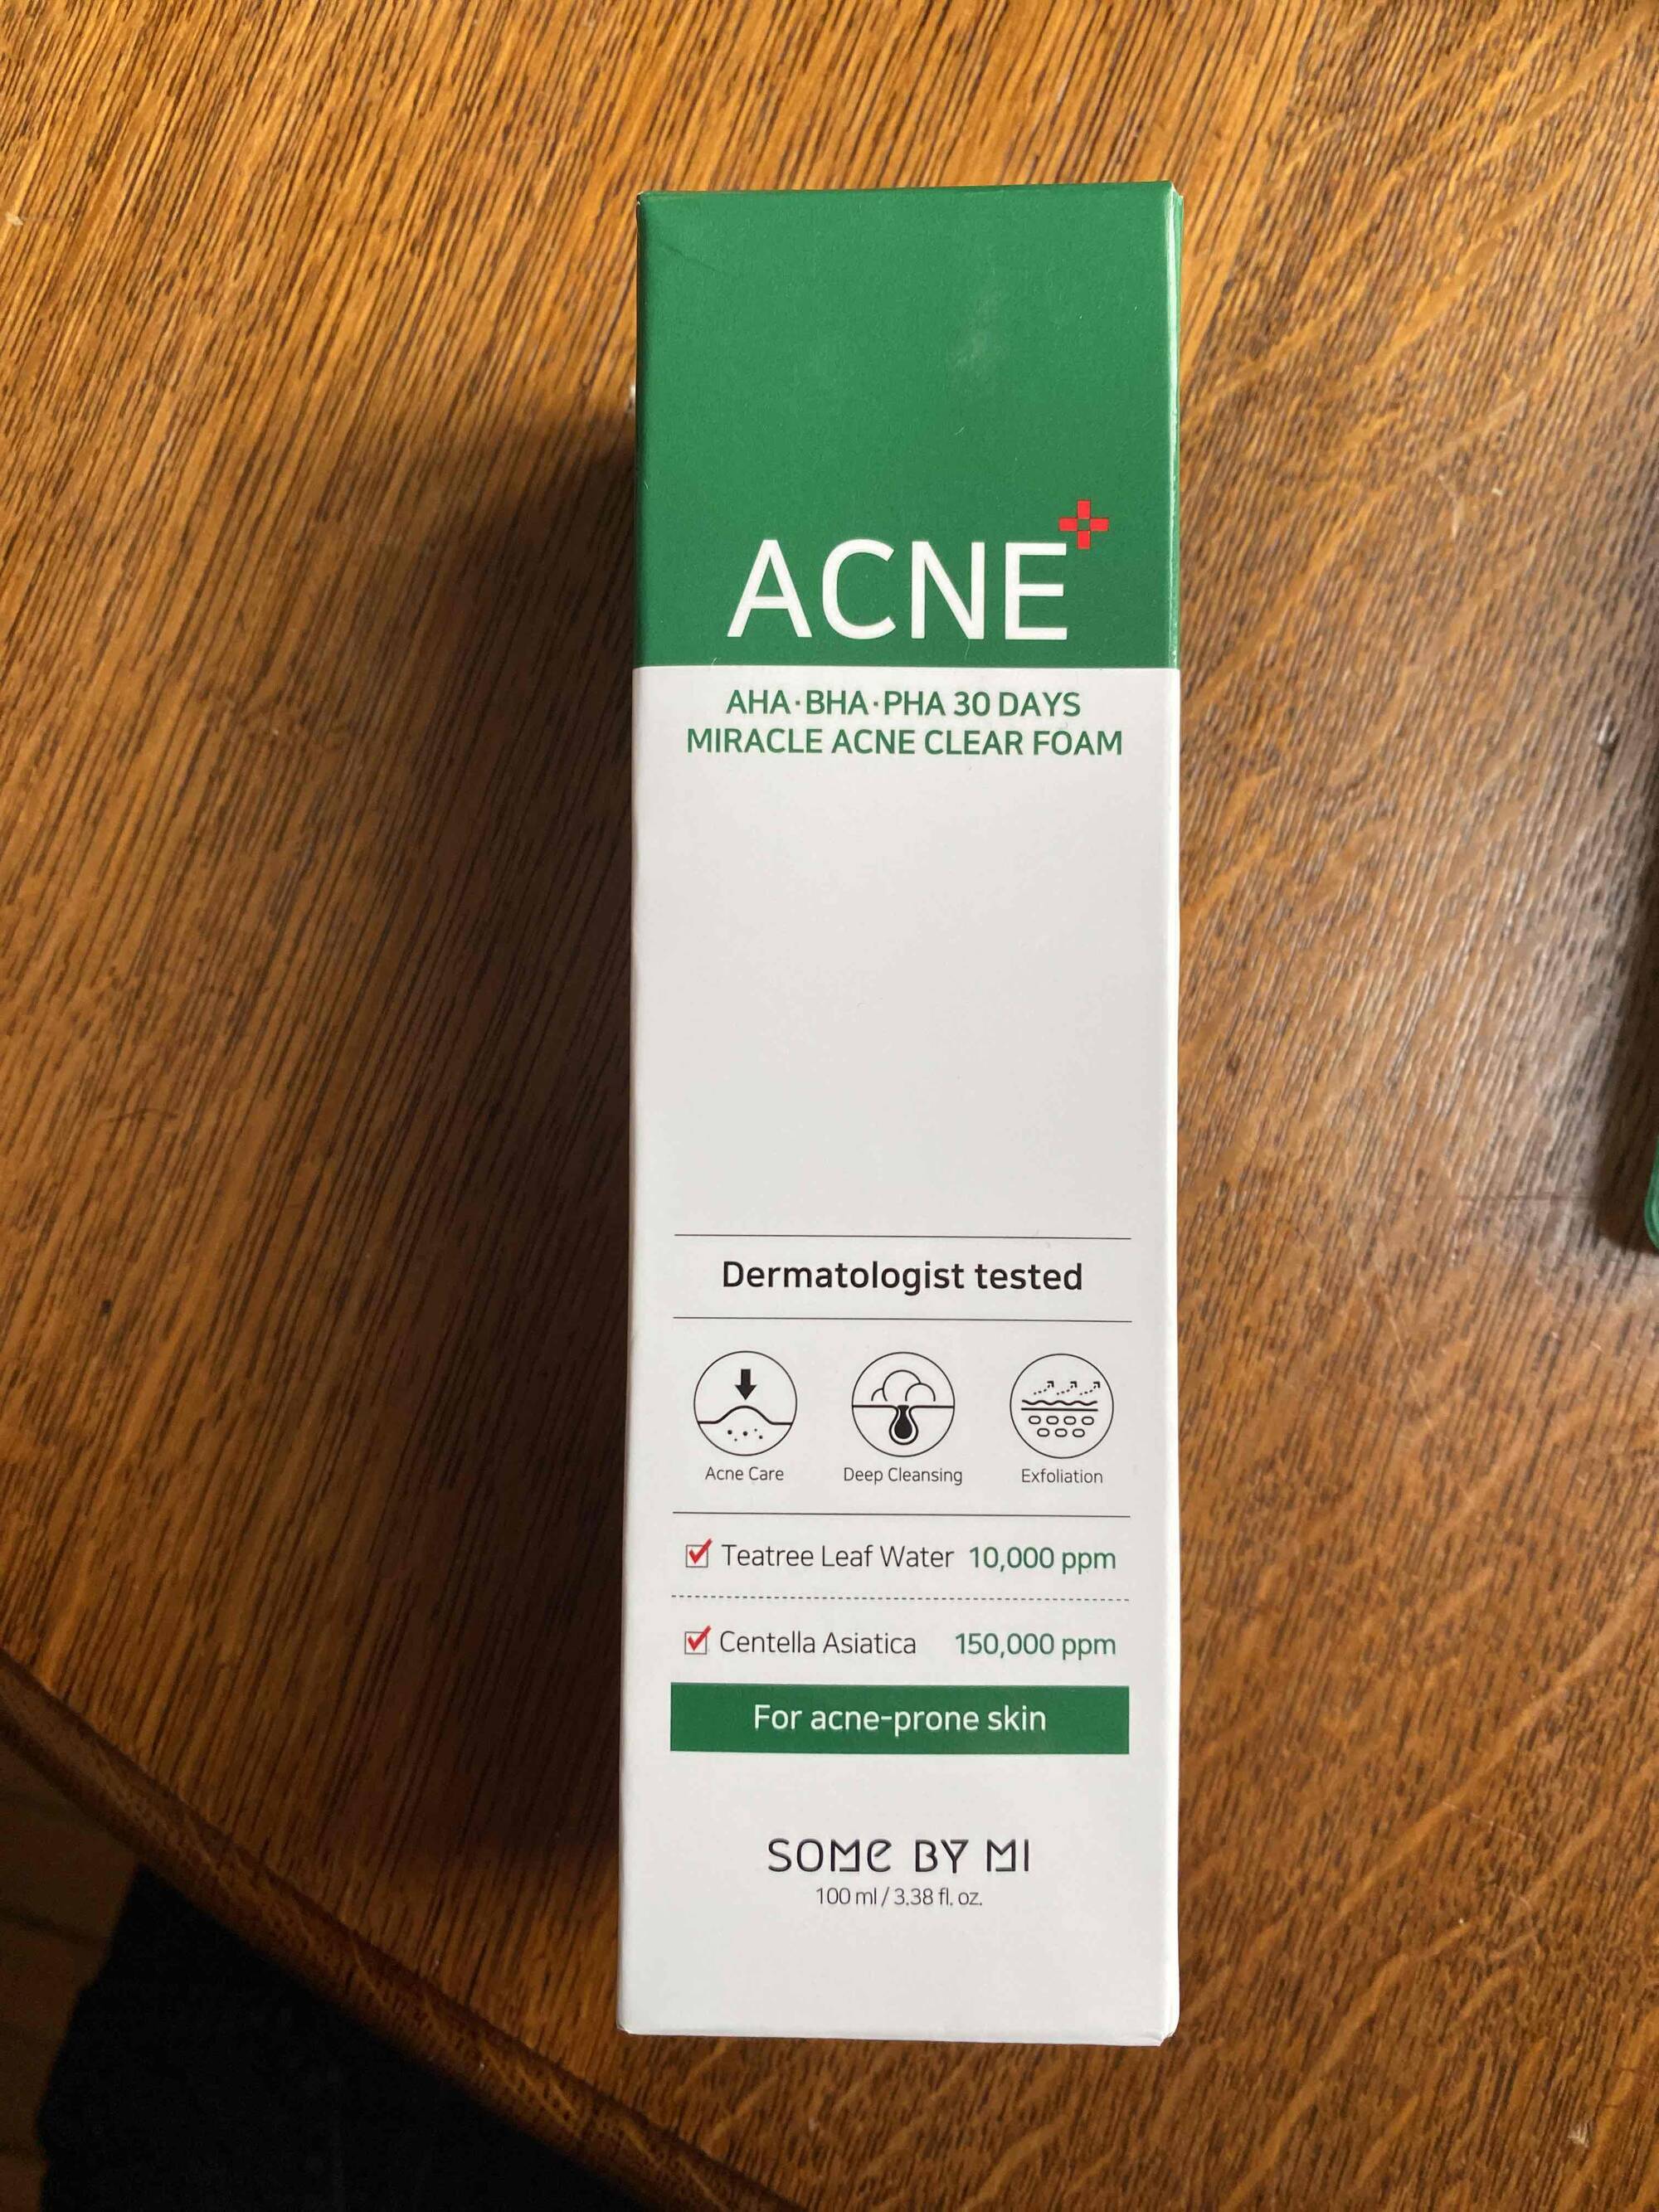 SOME BY MI - Miracle acne clear foam